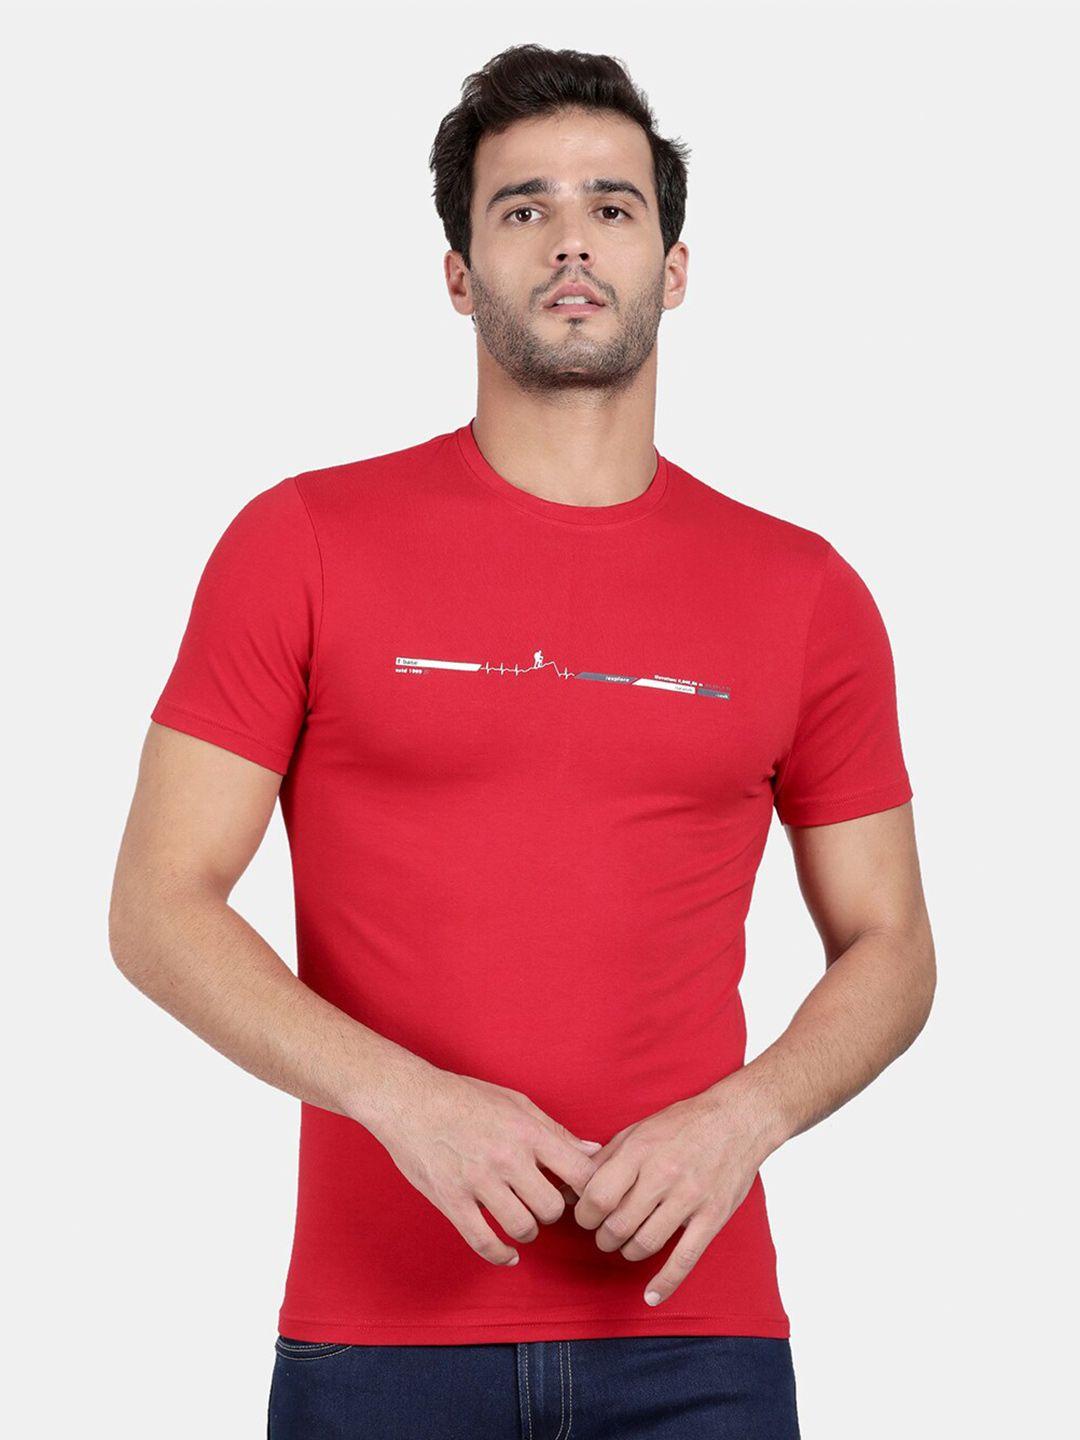 t-base men red typography printed slim fit cotton t-shirt